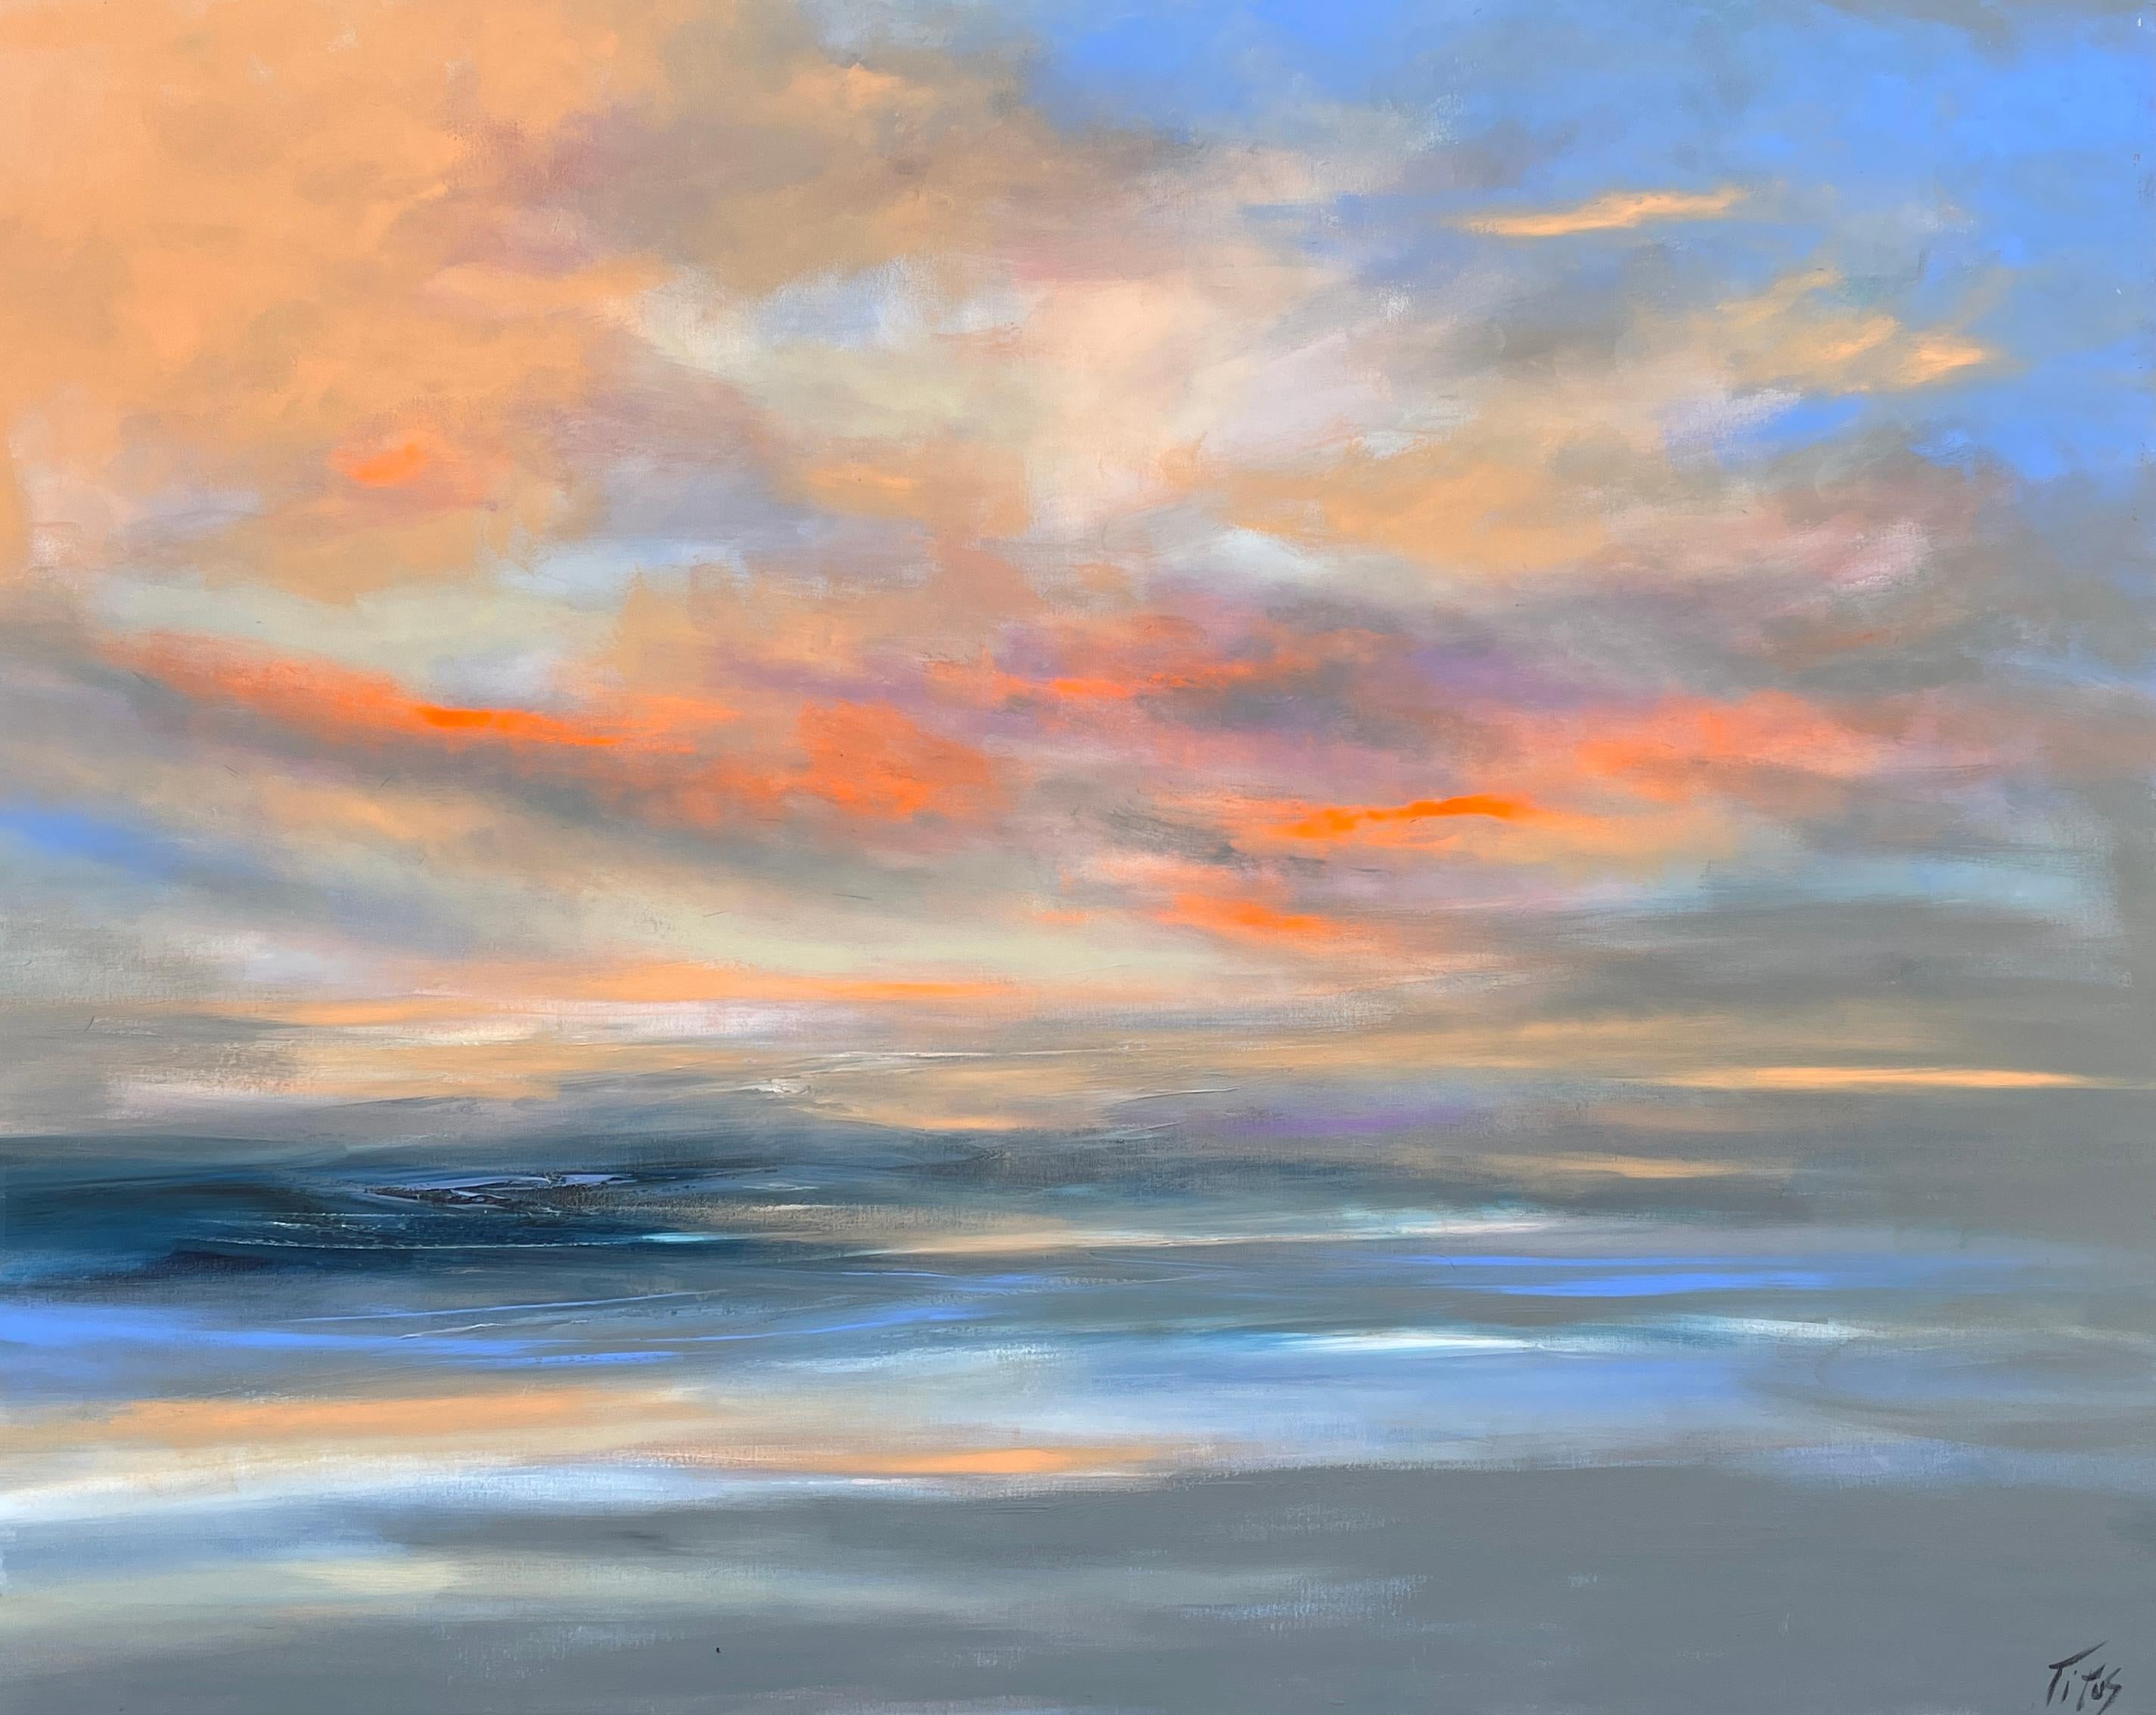 Mary Titus Landscape Painting - 'Silence' - Sunset Over the Ocean - Large Abstract Expressionist Seascape